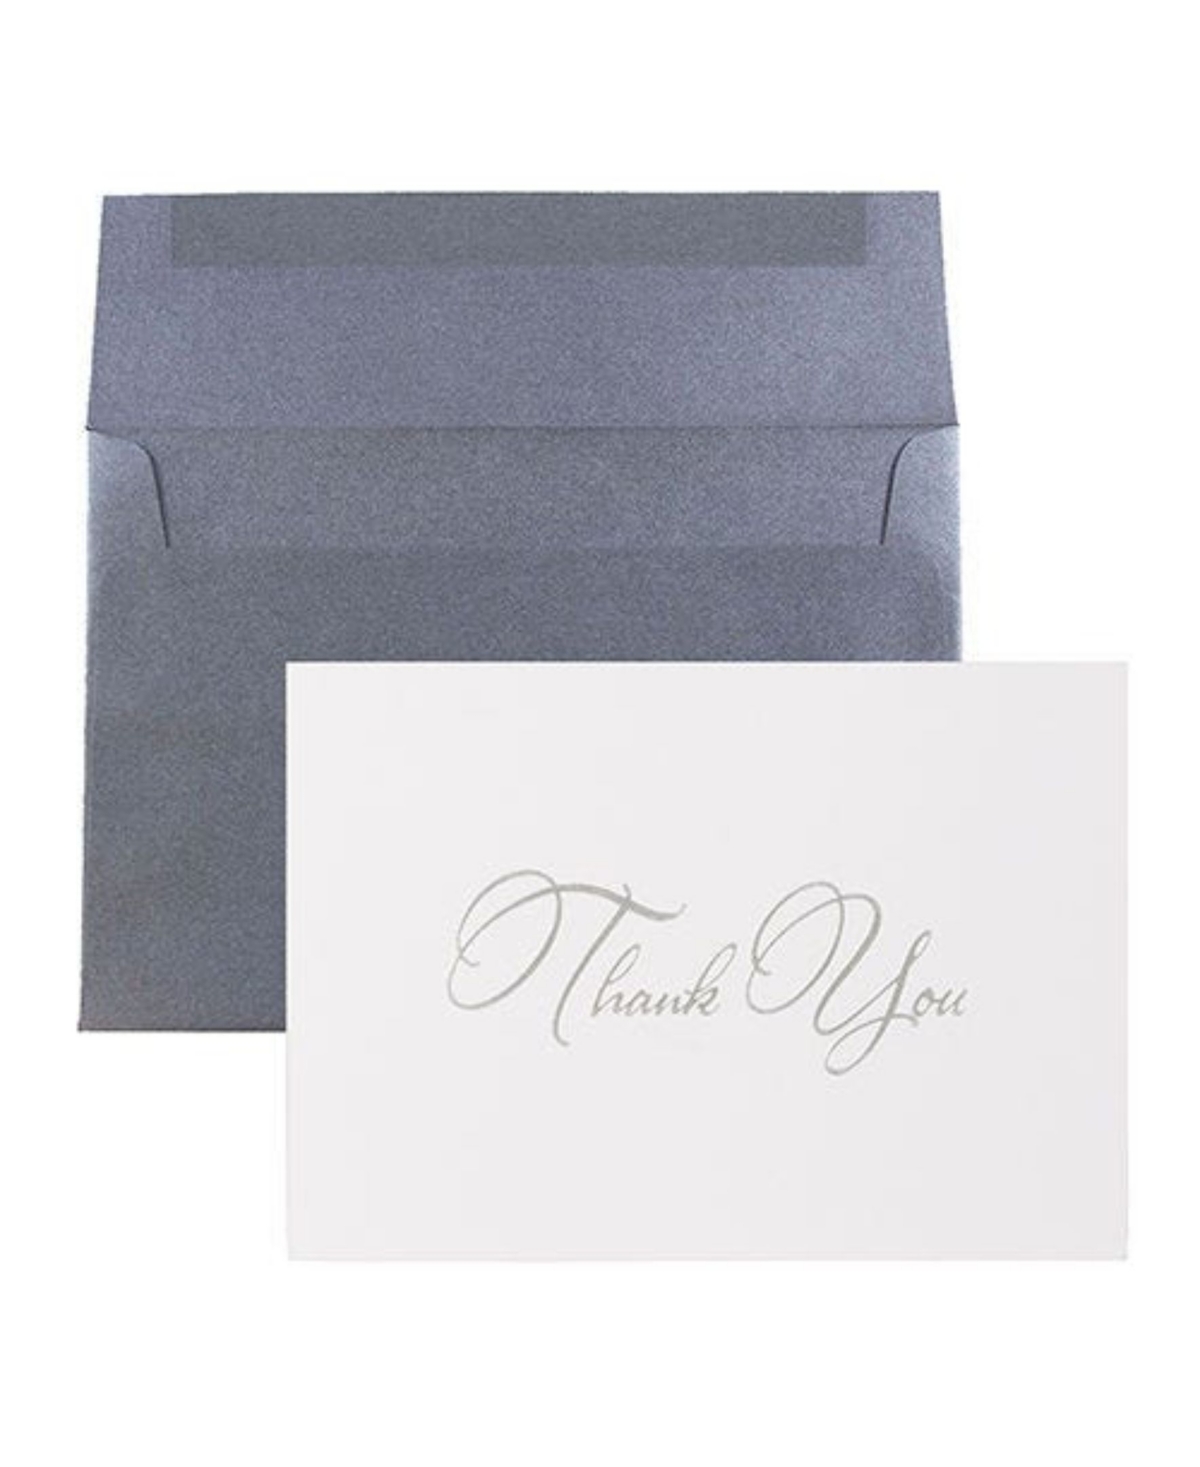 Thank You Card Sets - 25 Cards and Envelopes - Silver Script Cards Anthracite Envelopes